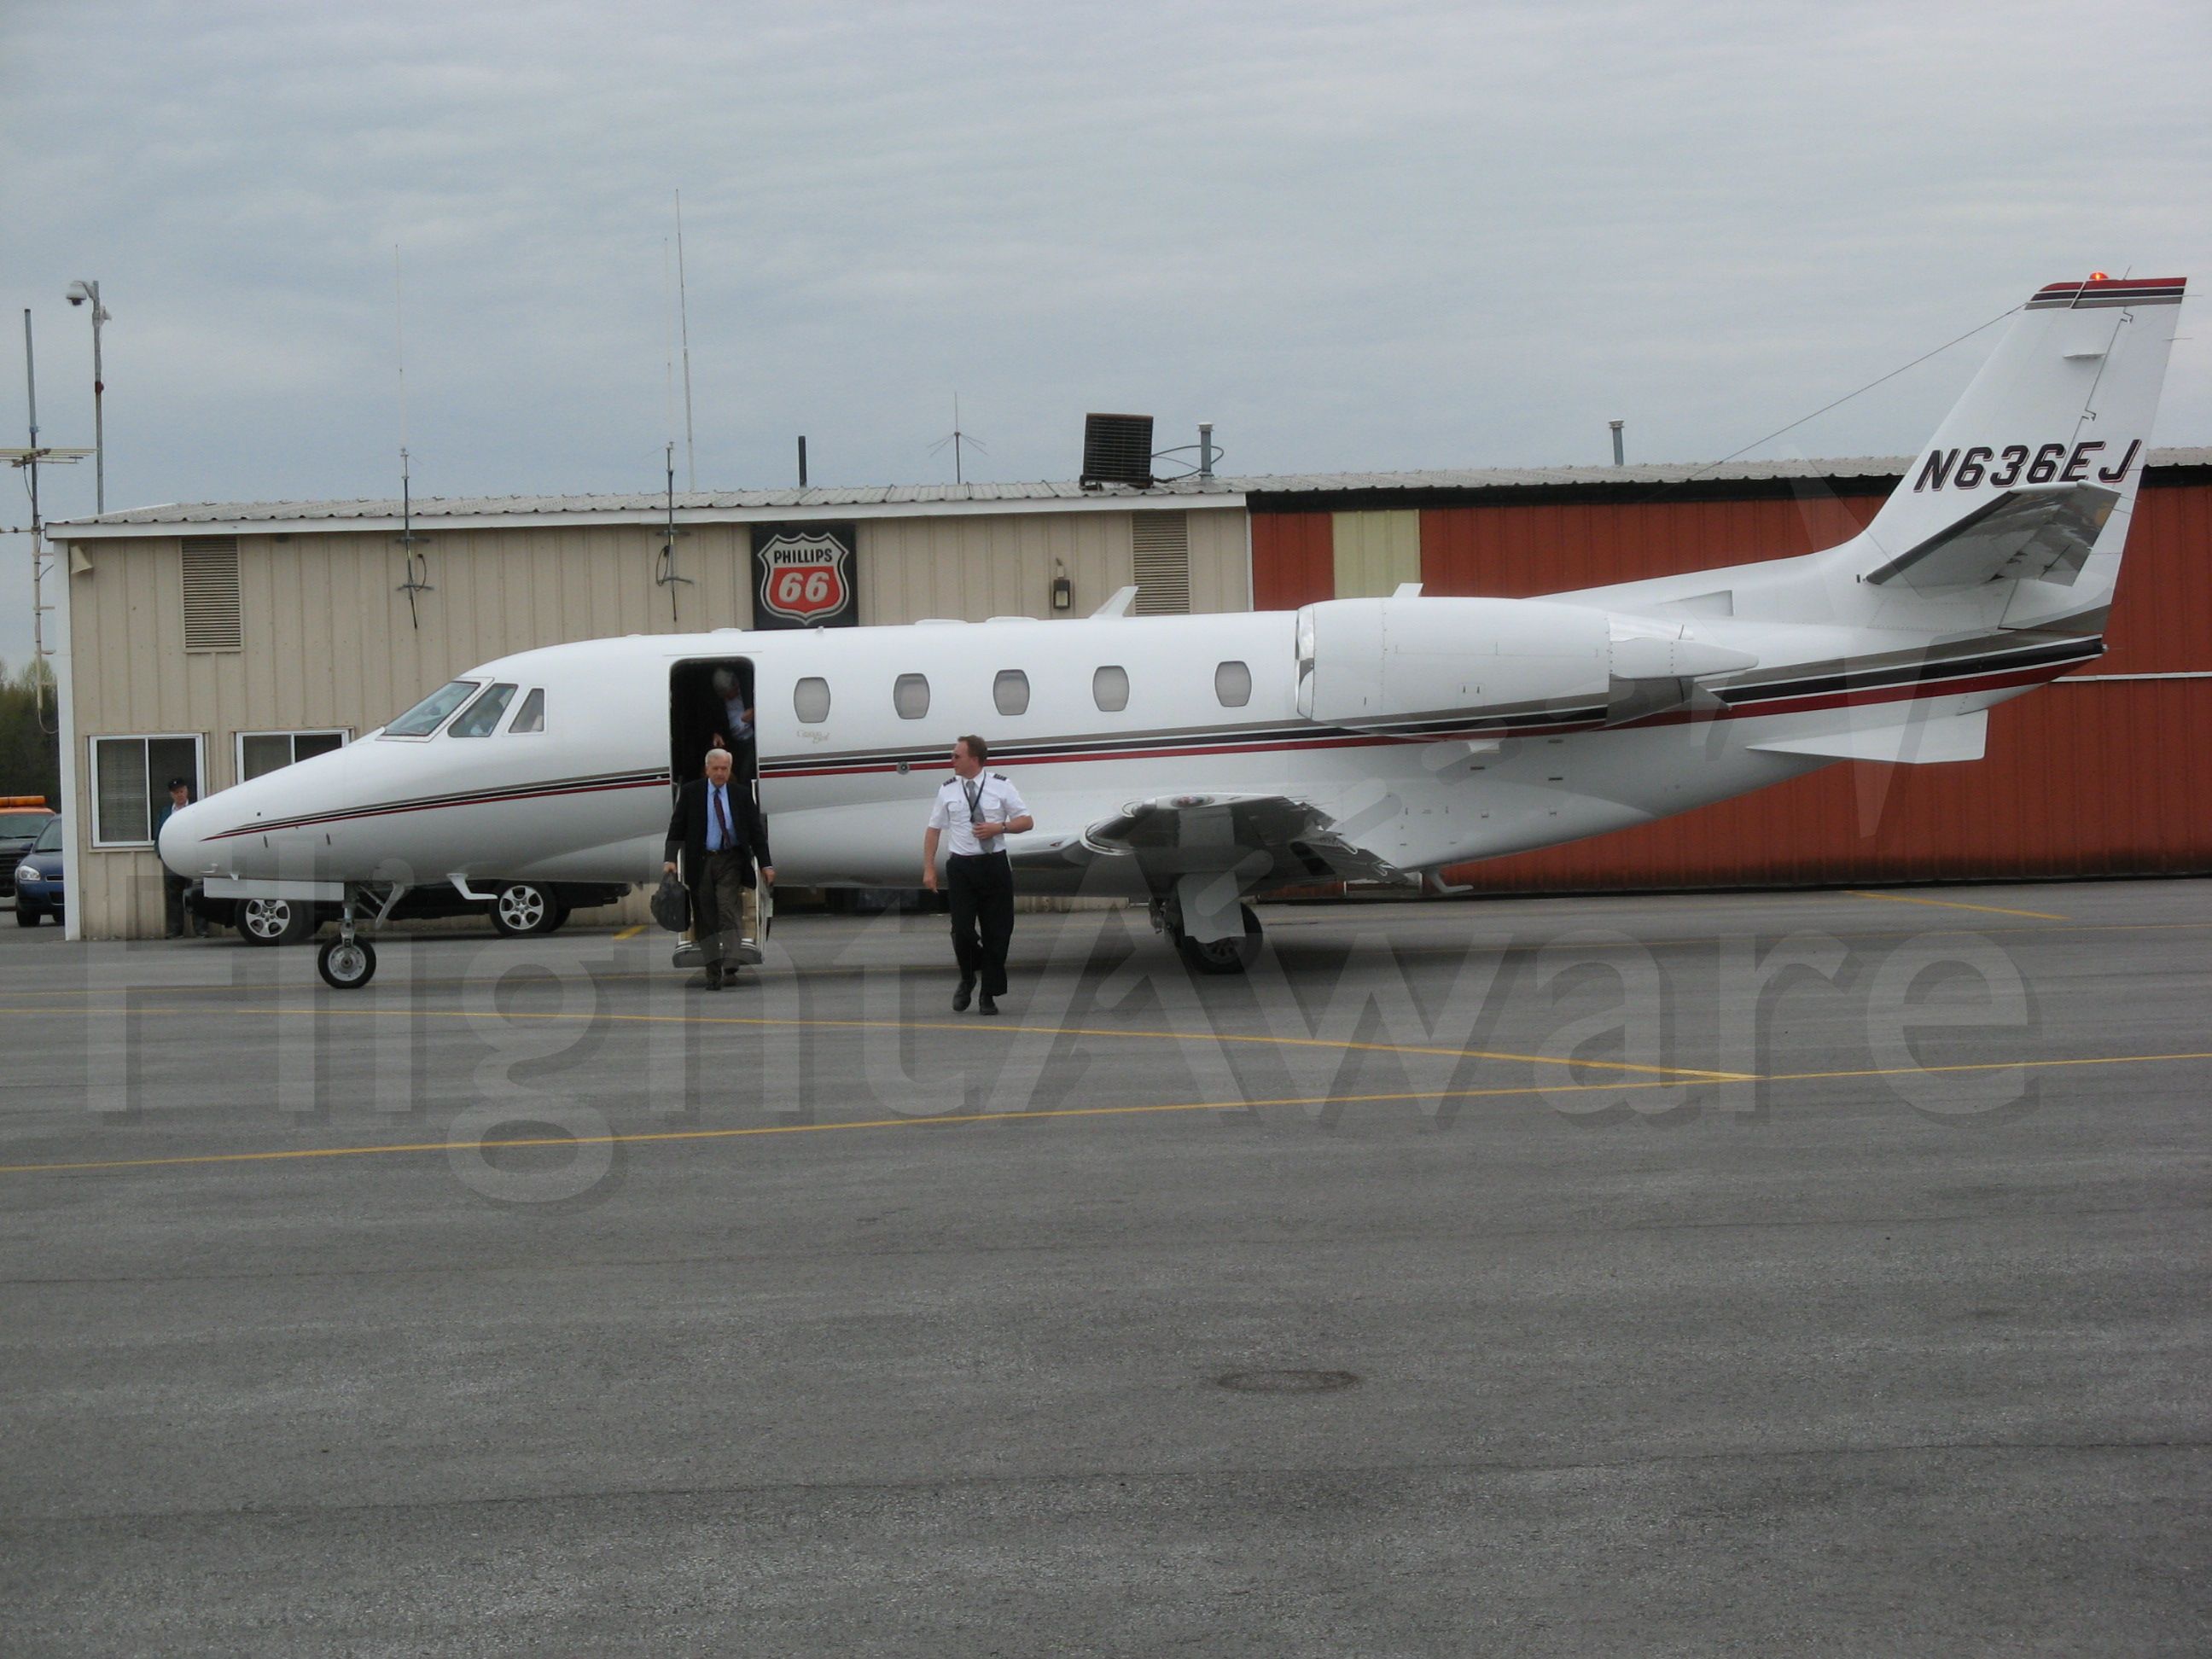 Cessna Citation Excel/XLS (N636EJ) - 2002 CESSNA CITATION EXCEL unloading passengers at Oswego County NY Airport(KFZY) on 5/5/09.